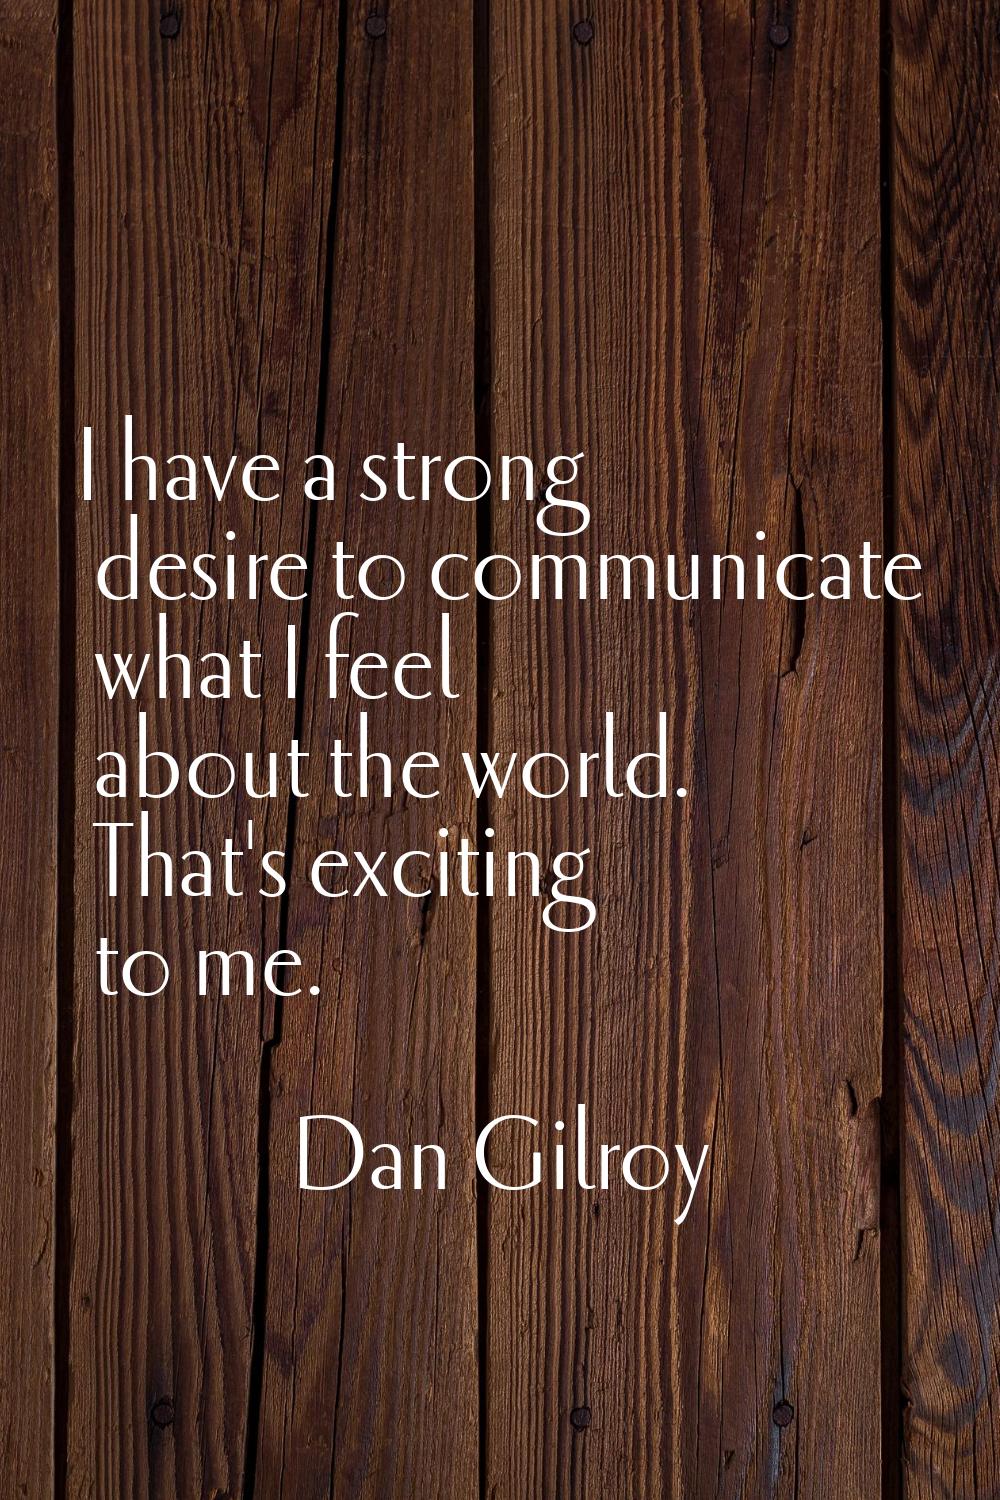 I have a strong desire to communicate what I feel about the world. That's exciting to me.